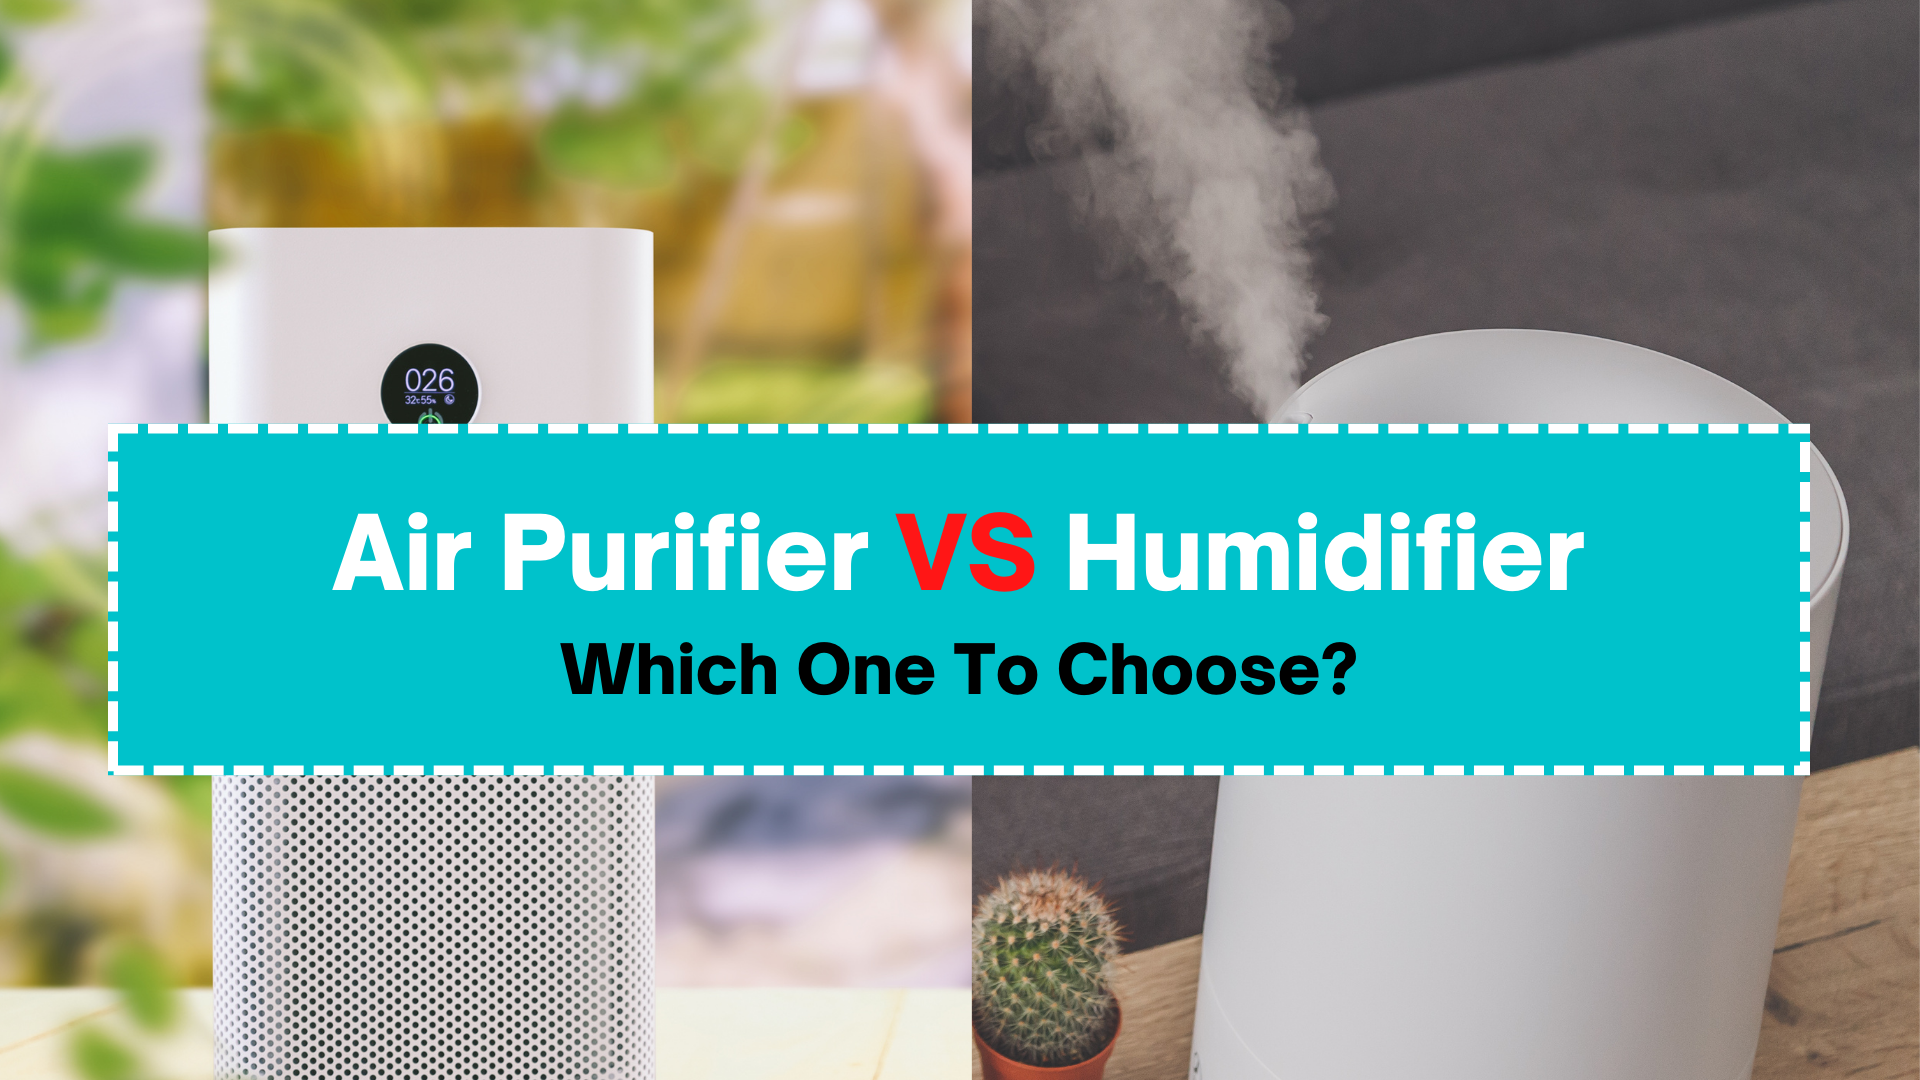 Air Purifier VS Humidifier: Which One To Choose?